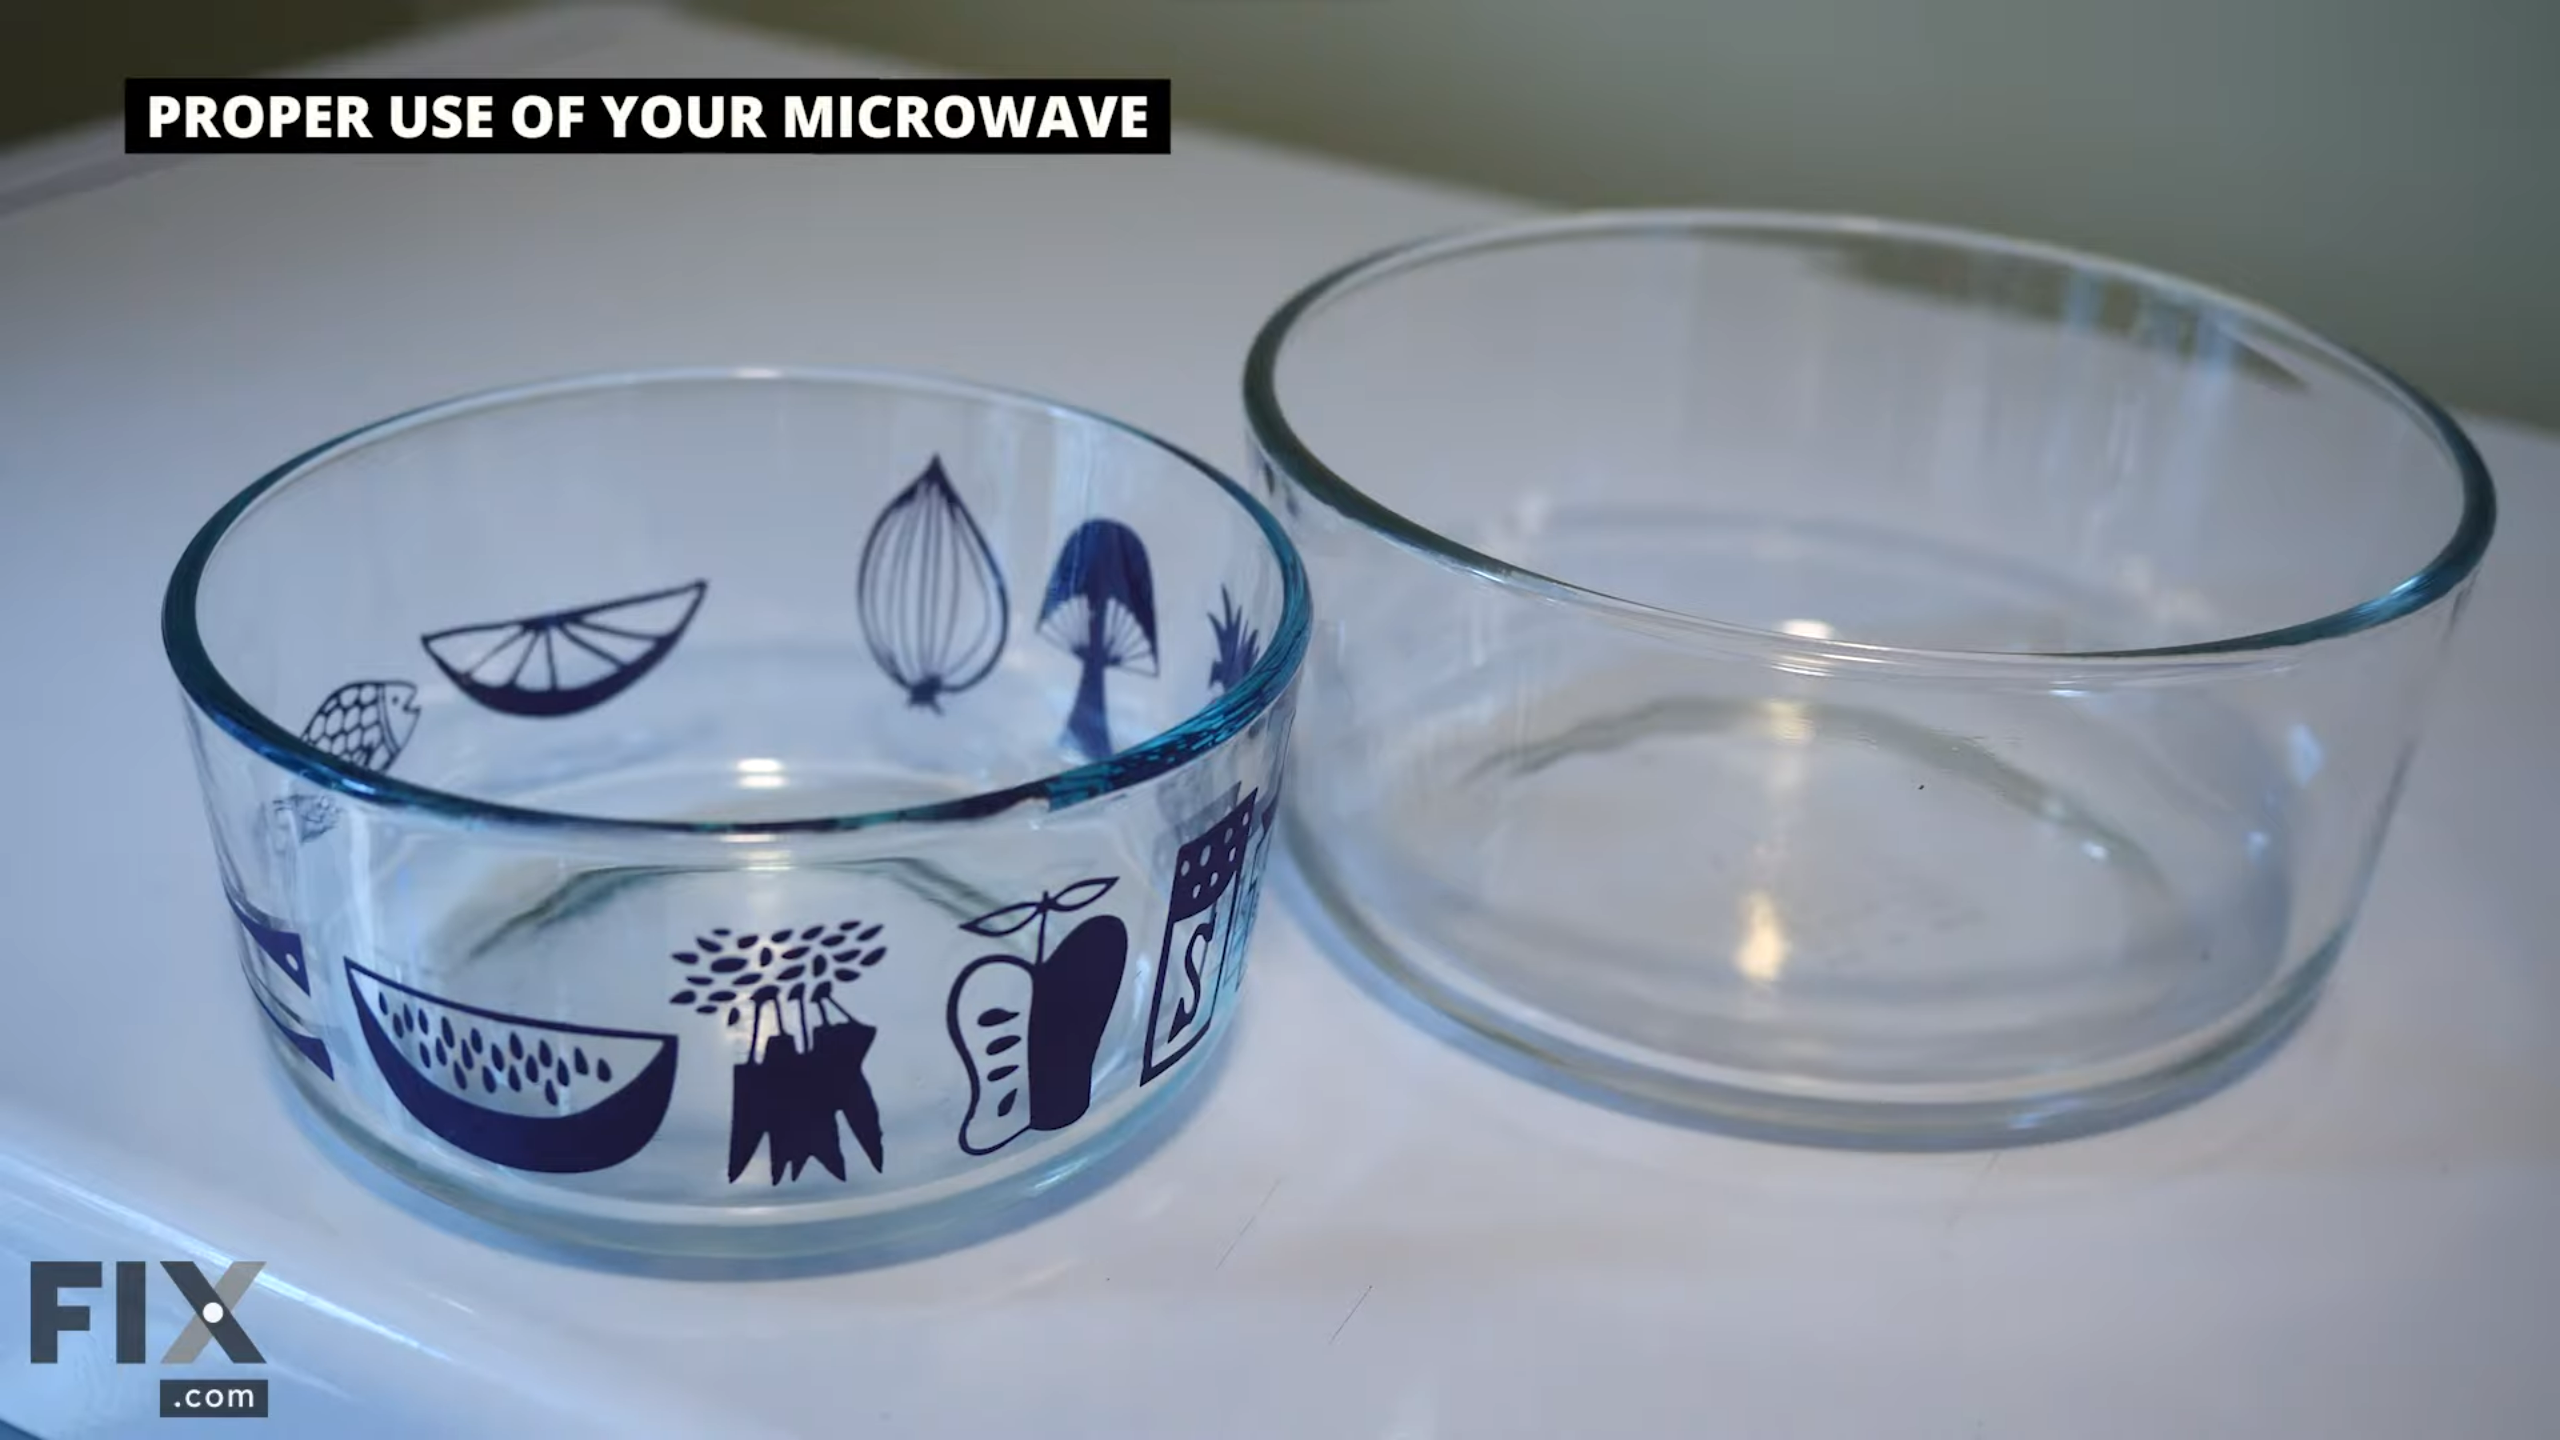 Two glass bowls without lids, one with a design and one without, sitting side-by-side on a white table.